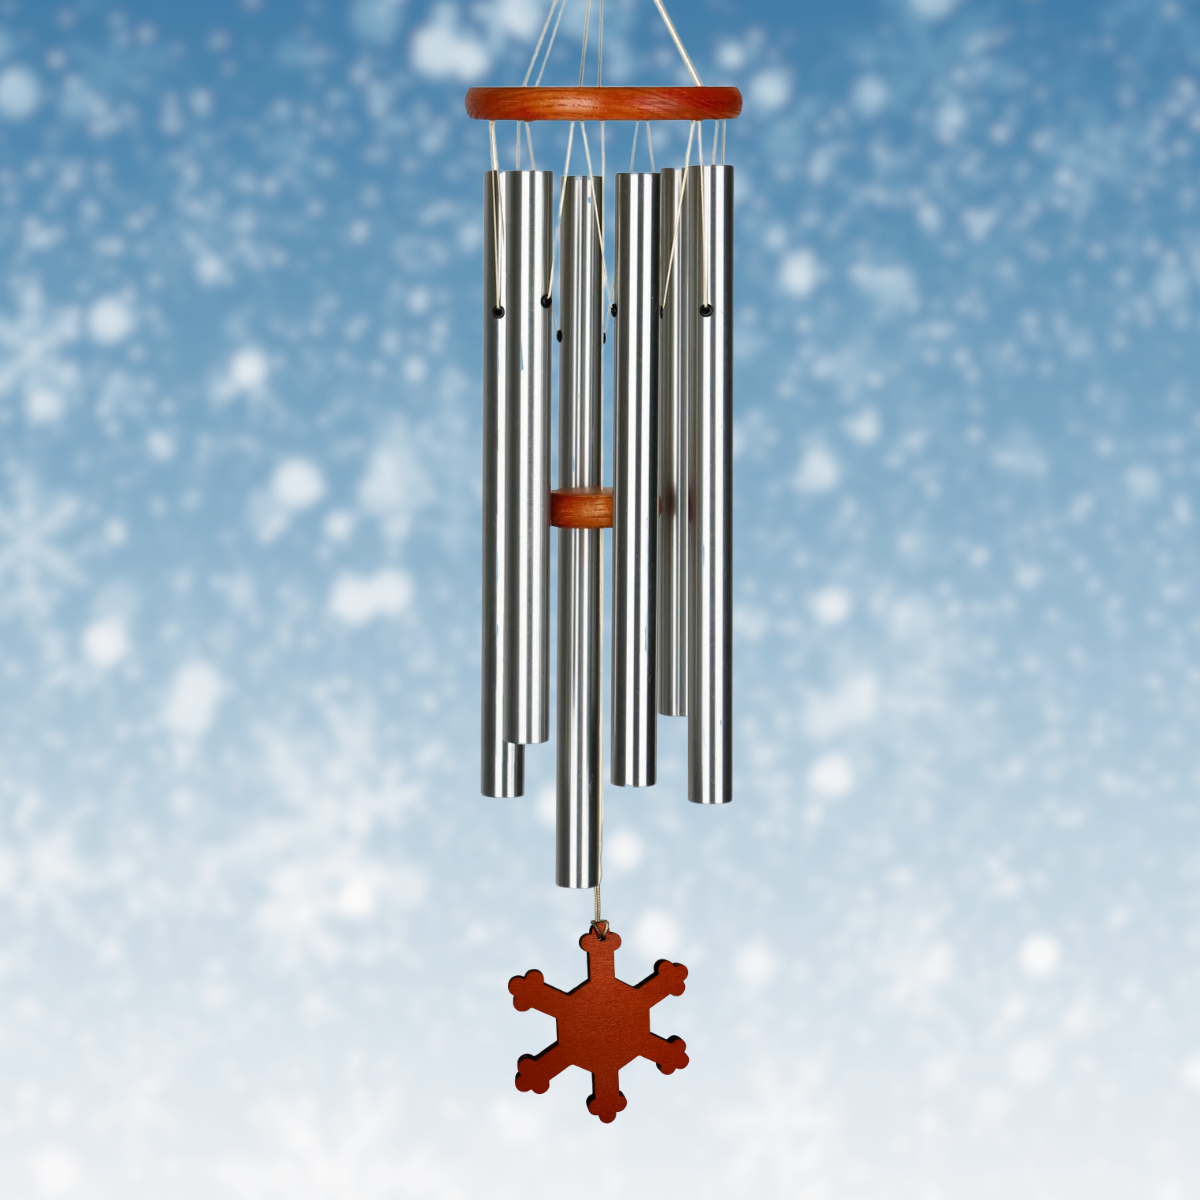 Amazing Grace 25 Inch Wind Chime - Engravable Snowflake Sail - Silver